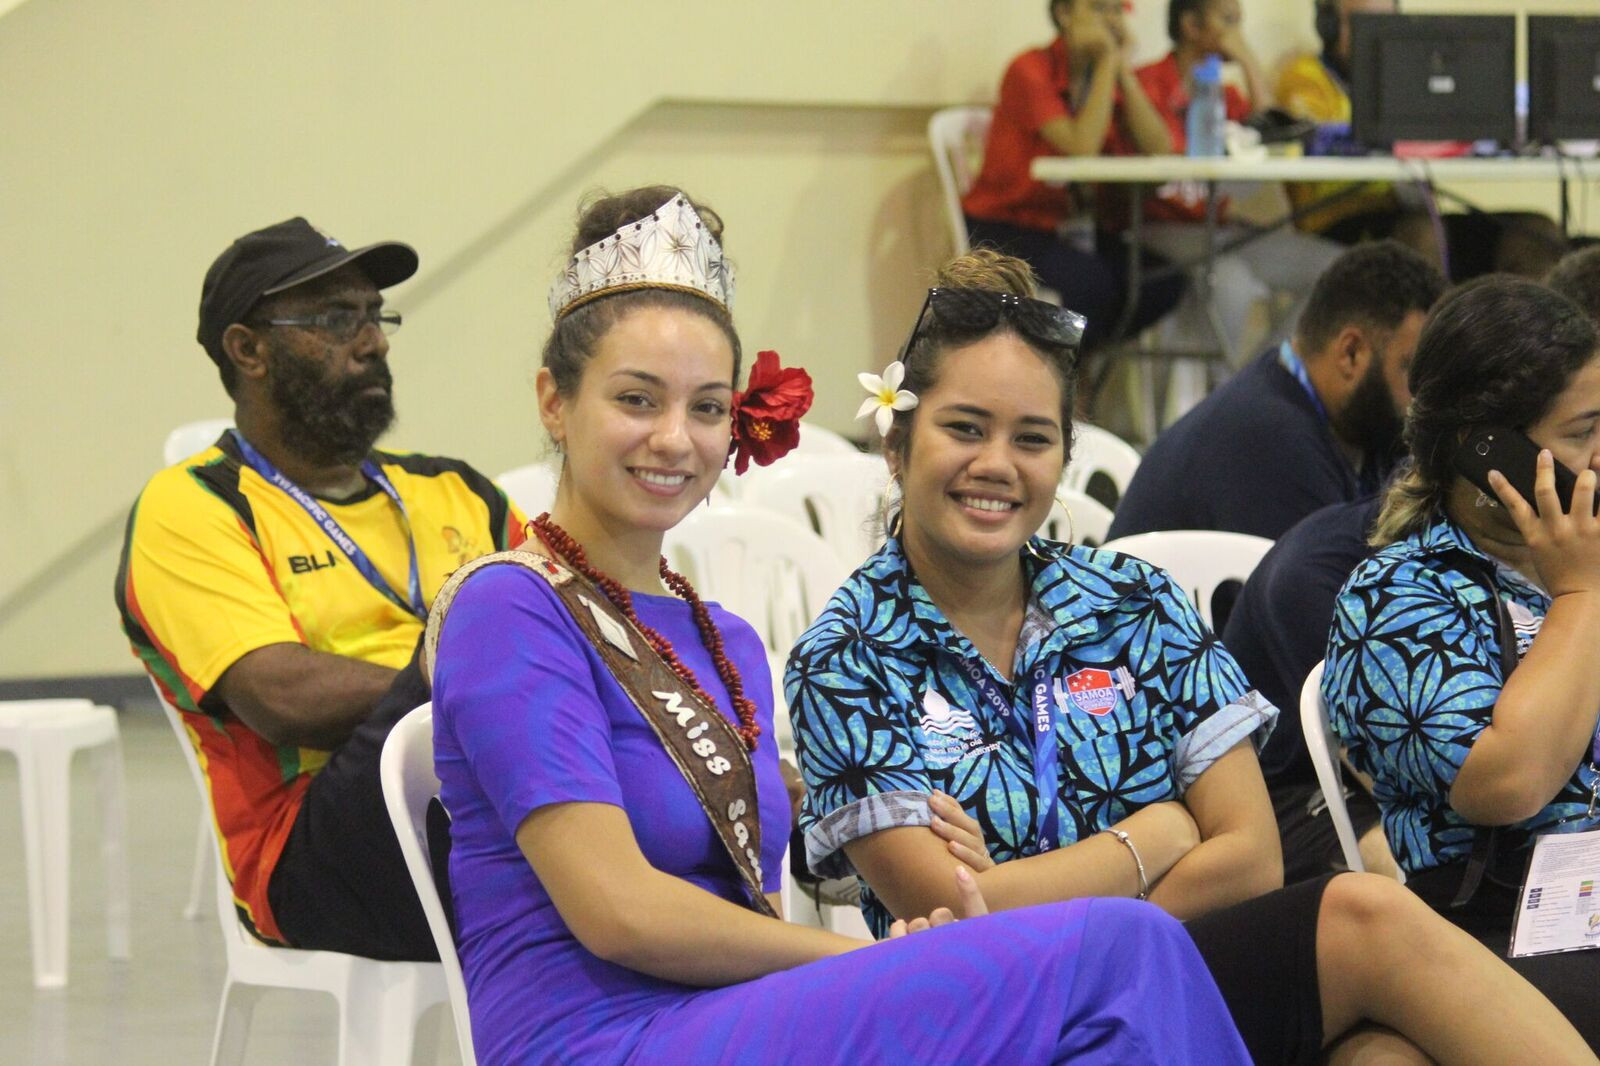 The current Miss Samoa, Sonia Piva, was among the interested spectators at Gym 1 ©Games News Service